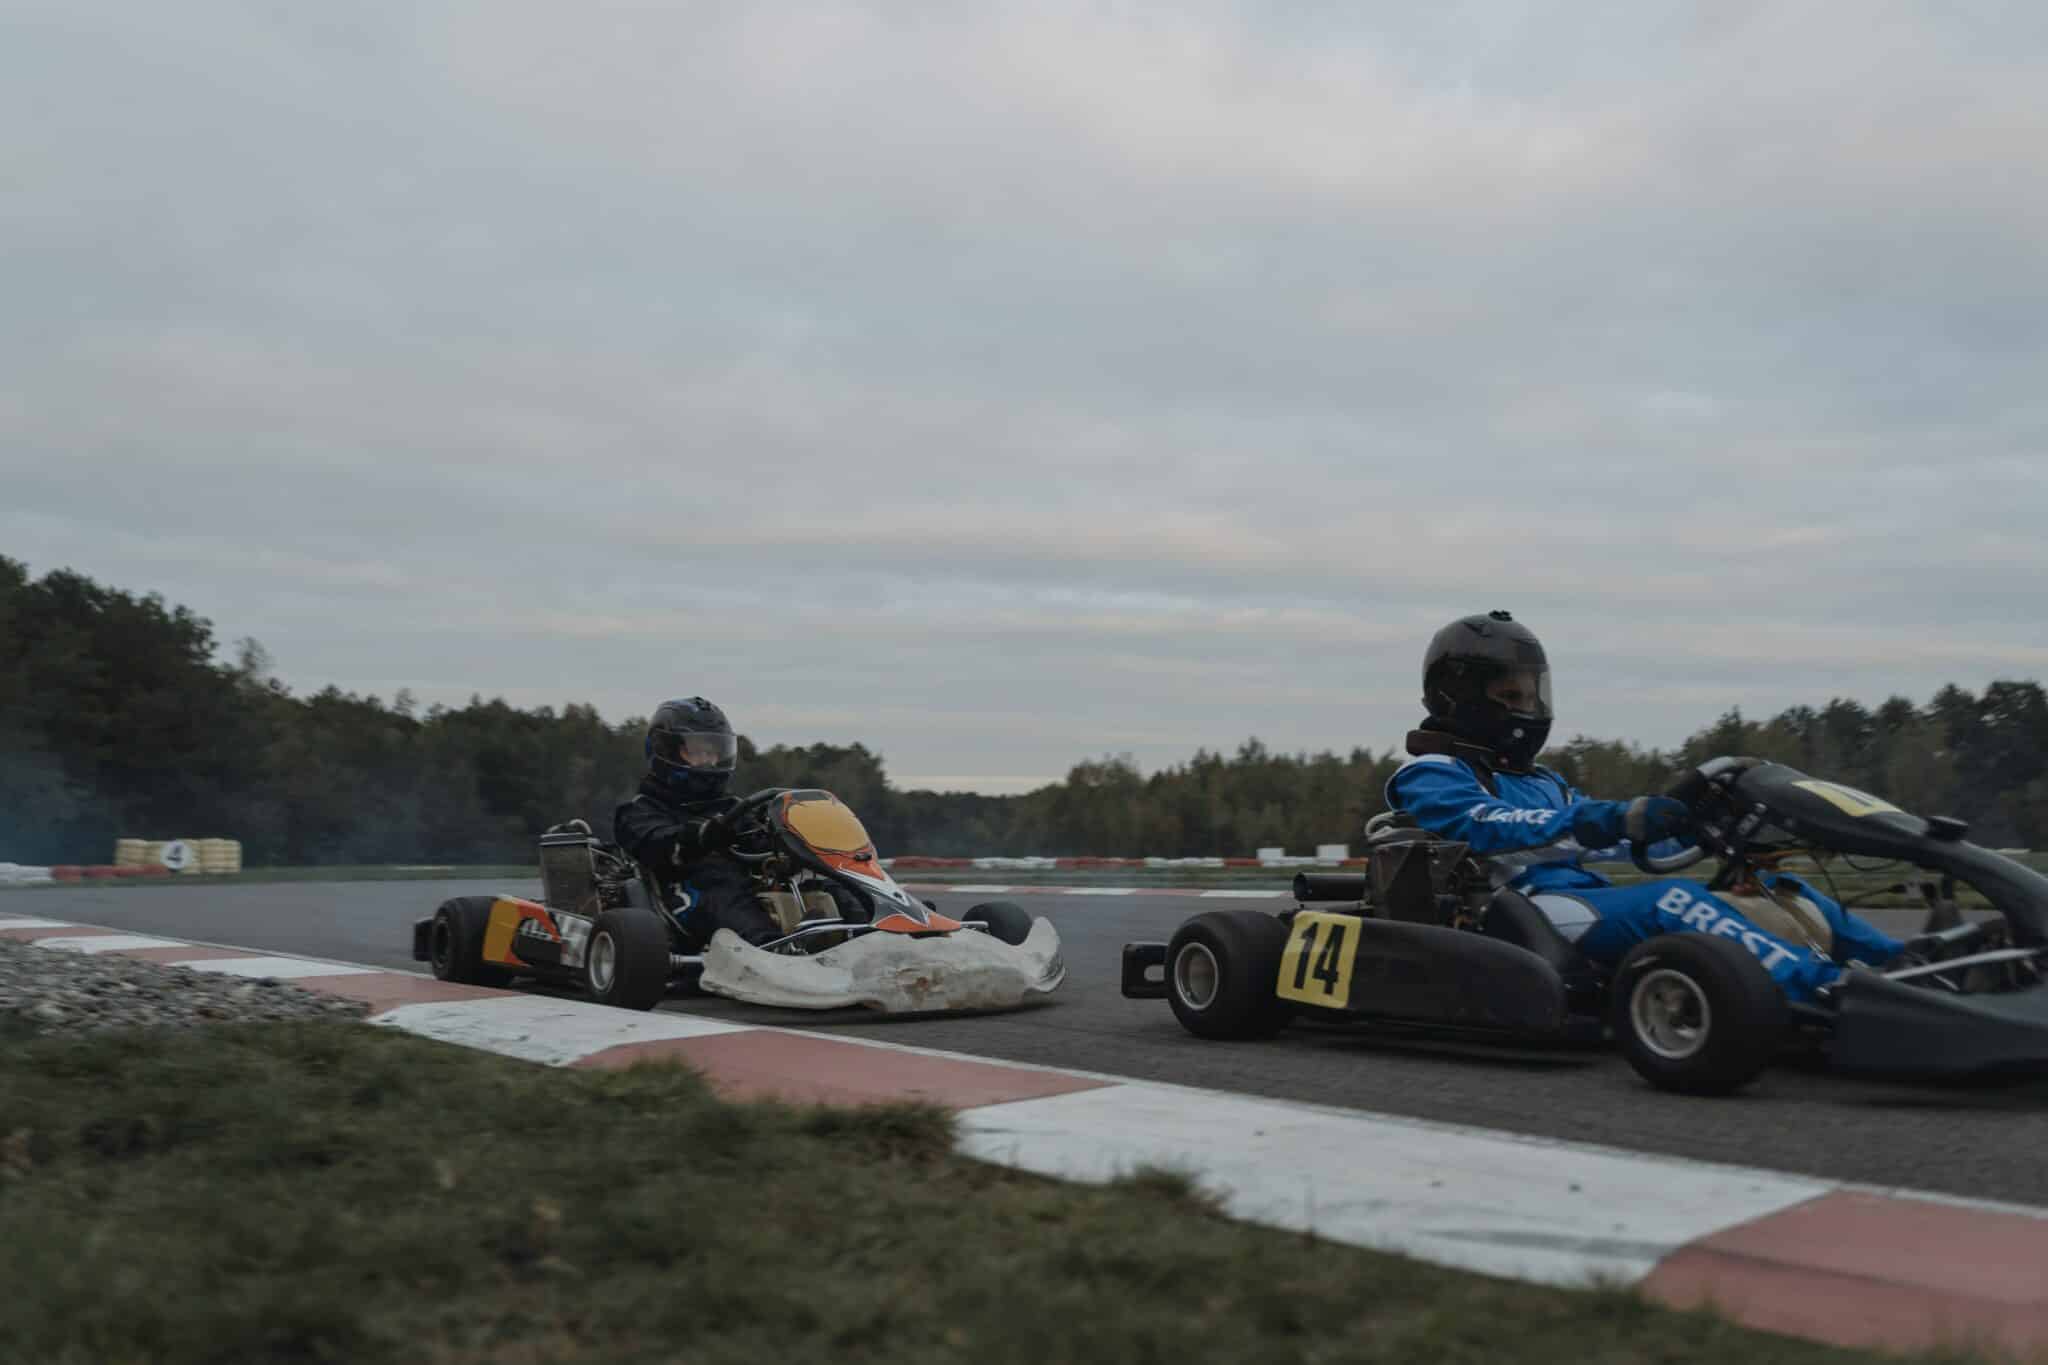 two people in go kart racing on a race track